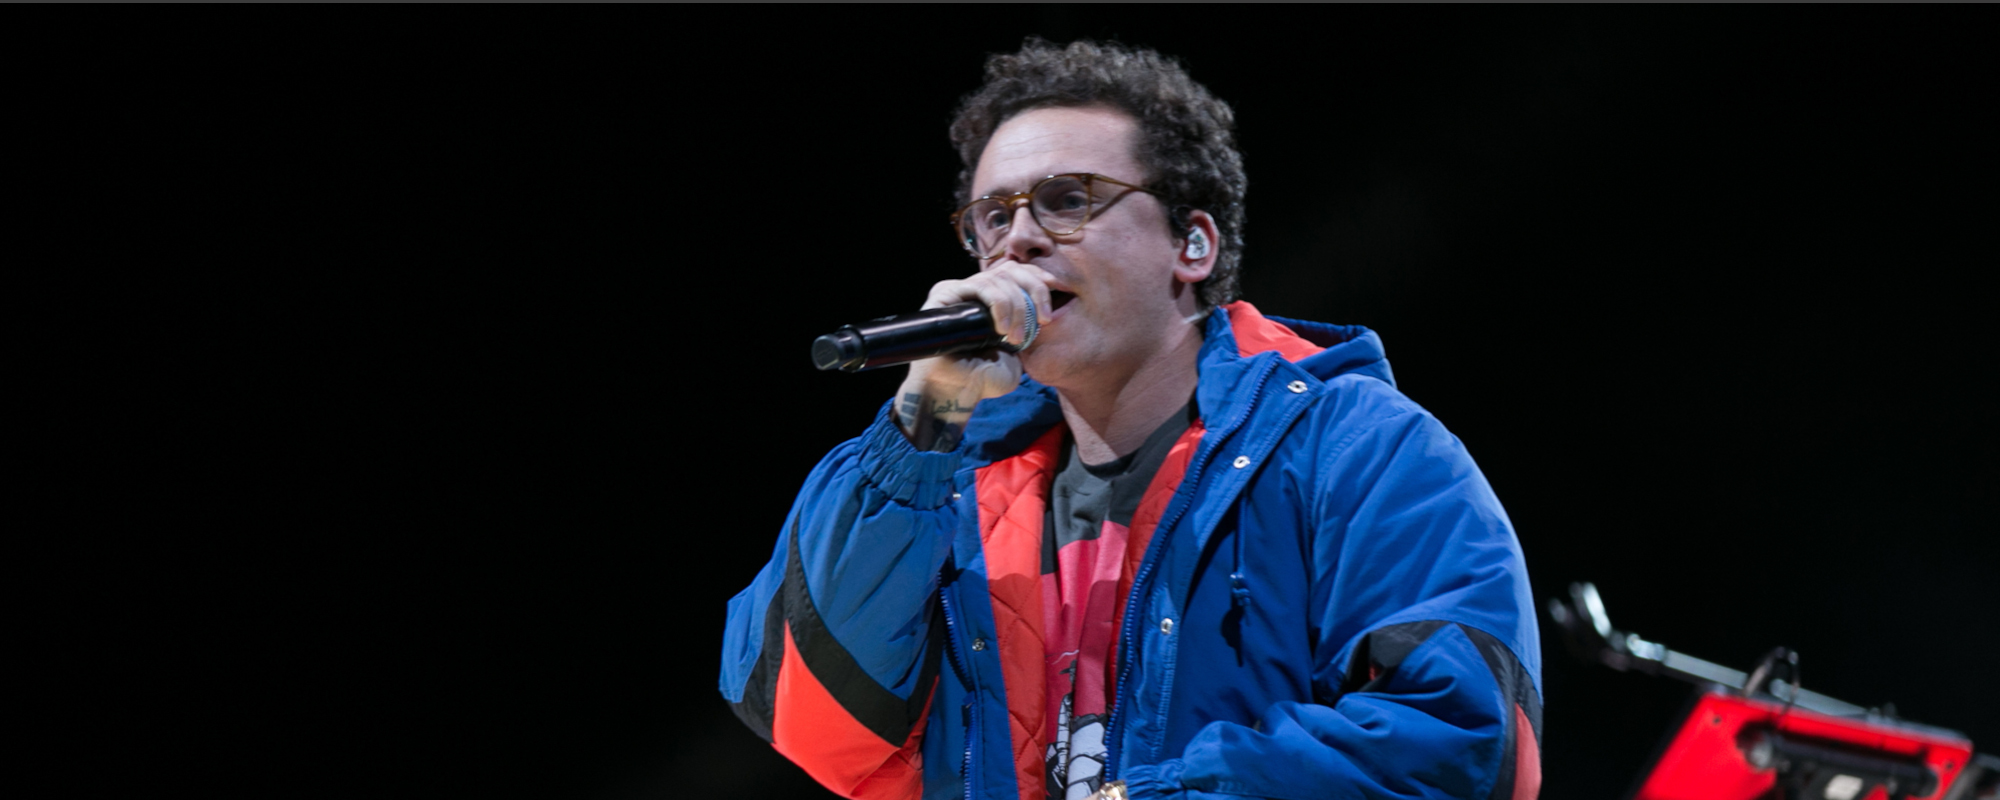 New Study: Logic’s Song May Have Prevented Hundreds of Suicides in U.S.